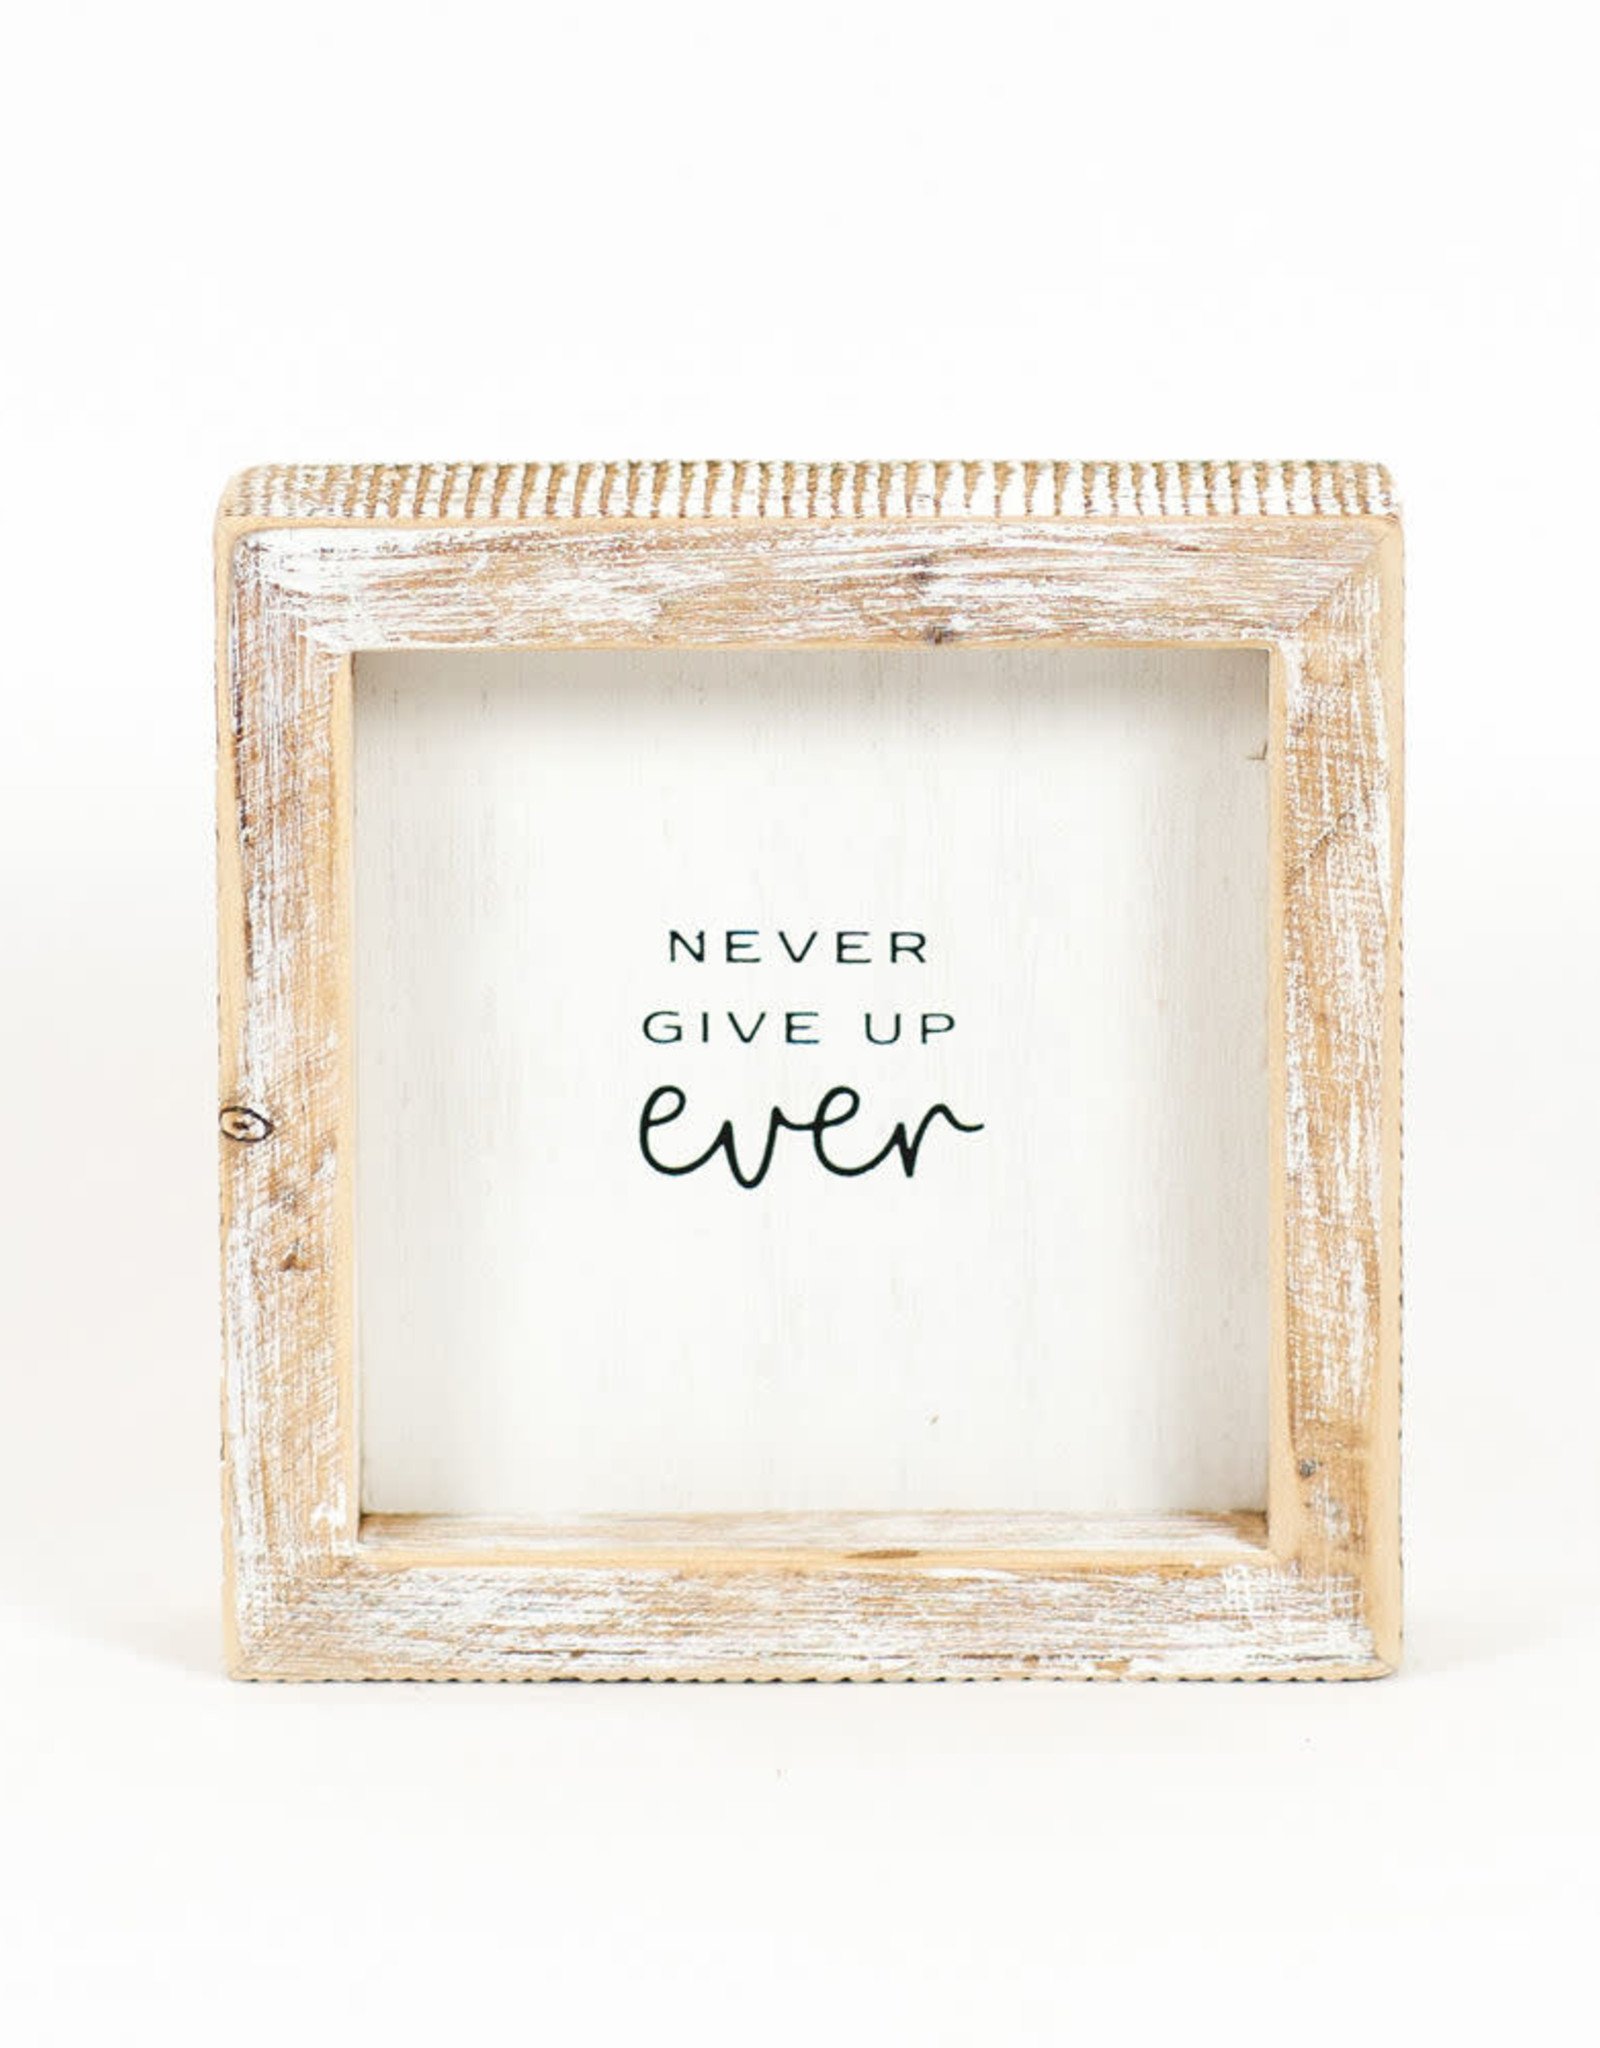 Home 11460 5X5X1.5 WOOD FRAMED SIGN ( NEVER GIVE UP)